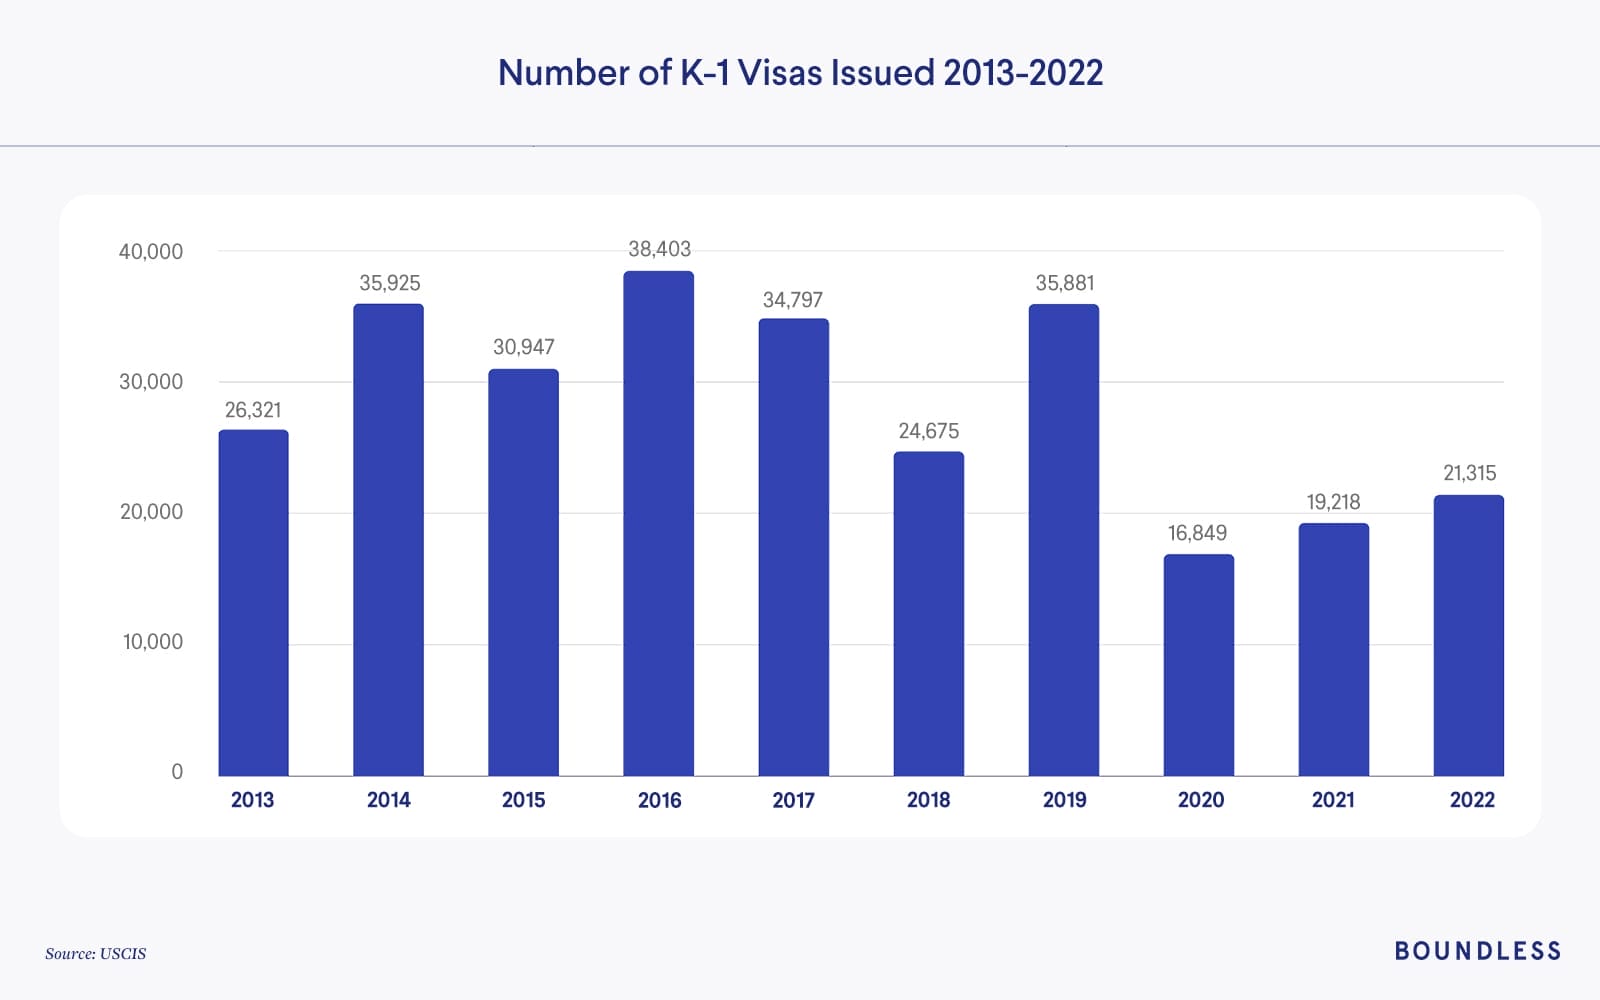 Graph showing the number of K-1 visas issued 2013-2022